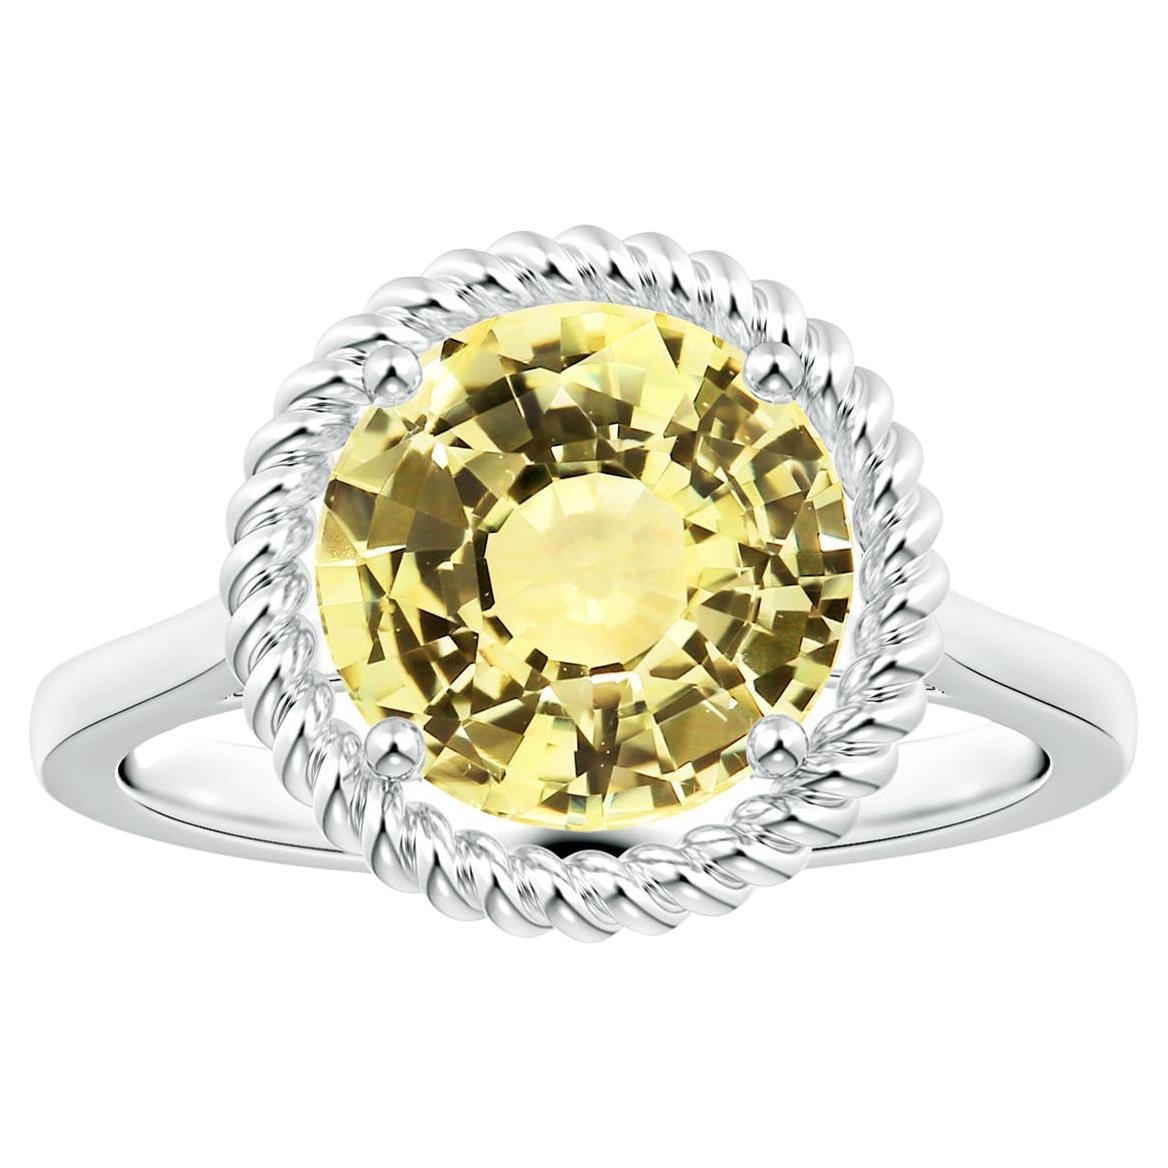 Angara Gia Certified Natural Yellow Sapphire Halo Ring in White Gold